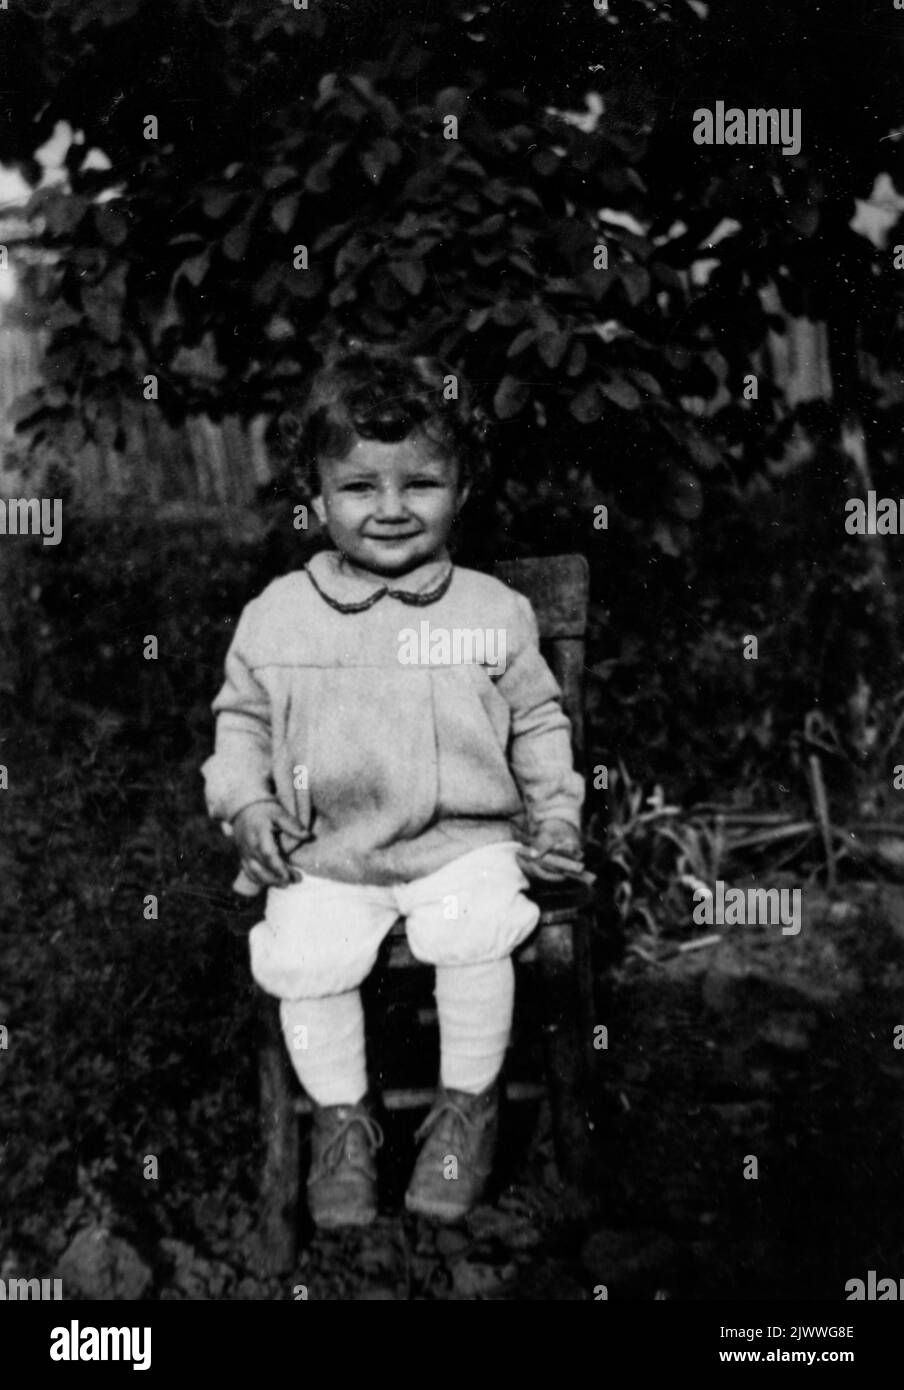 Black and white portrait of 3 years old smiling girl sitting on a chair in rural environment, late 60s, Bulgaria, Europe, Balkans Stock Photo